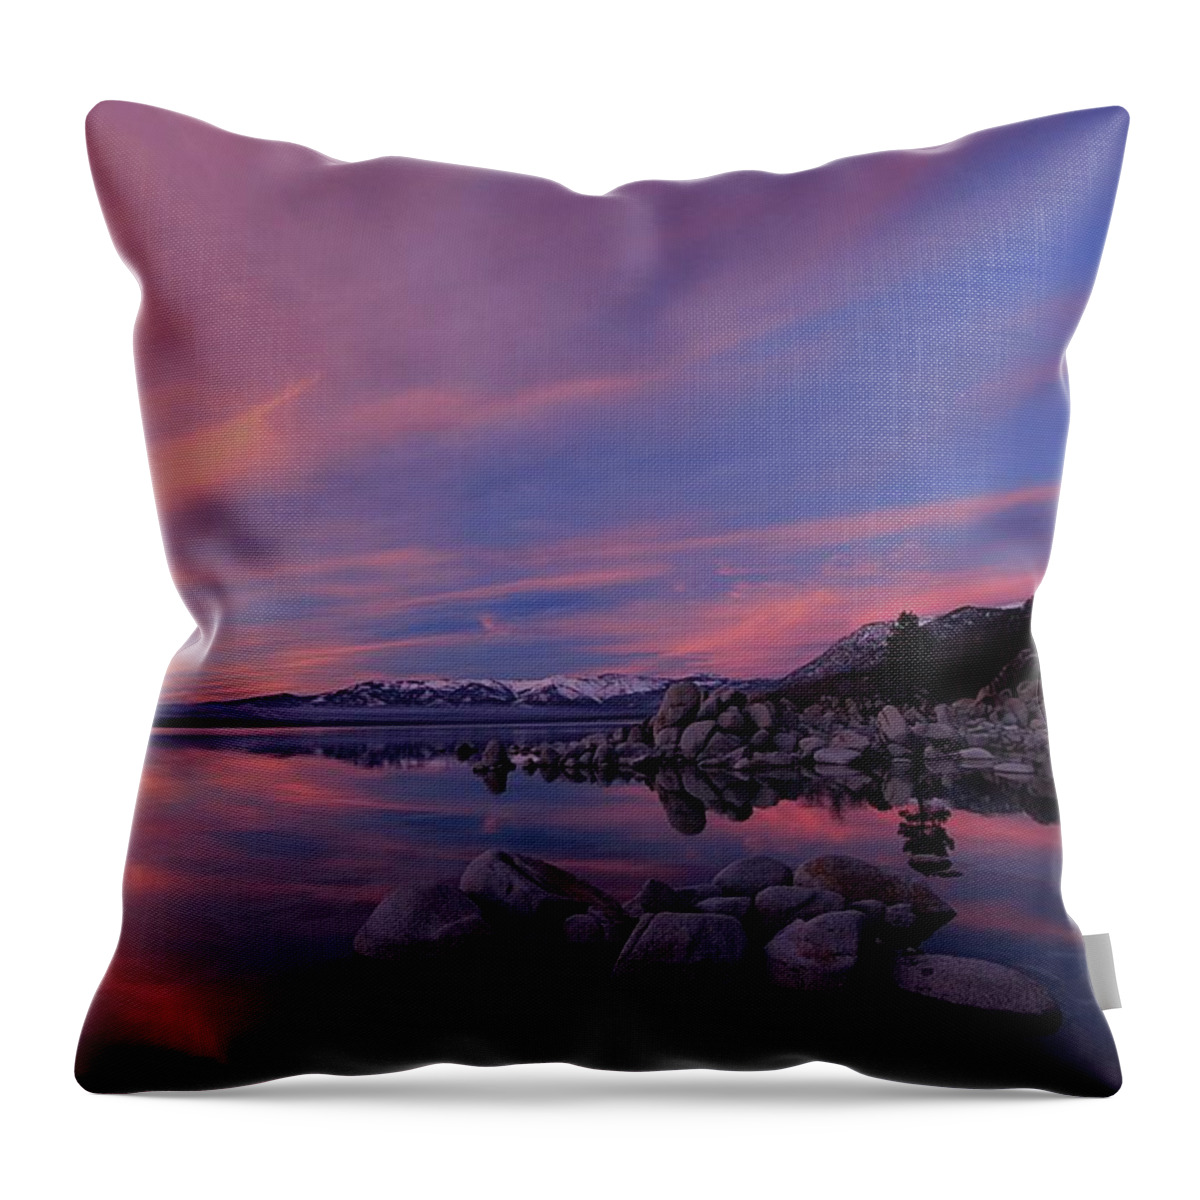 Lake Tahoe Throw Pillow featuring the photograph Alpenglow Nightlife by Sean Sarsfield